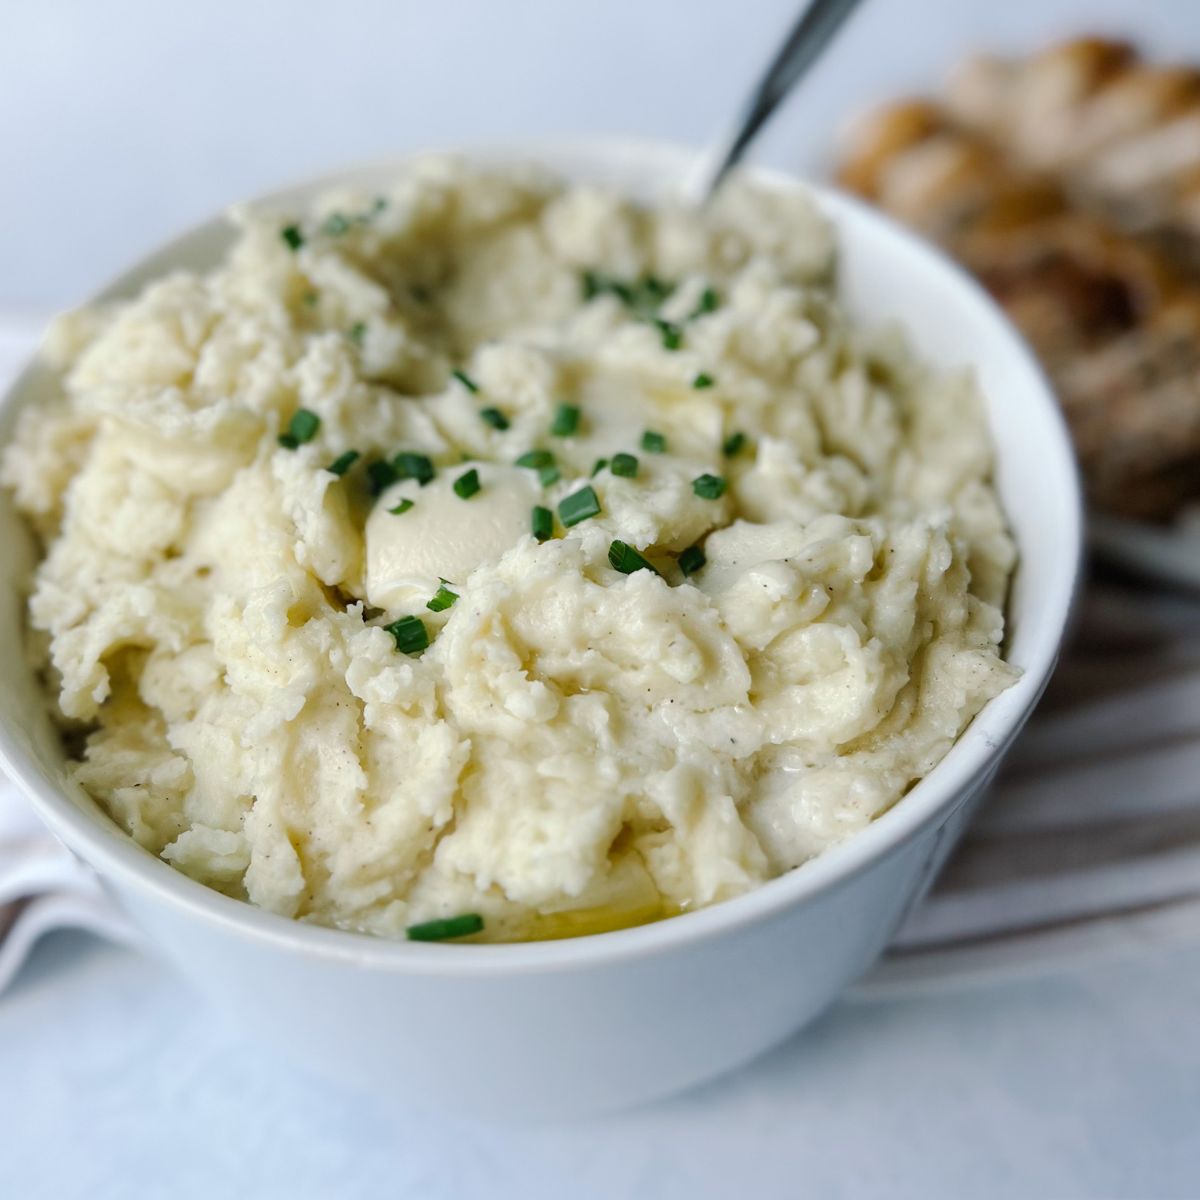 garlic mashed potatoes with chives on top.